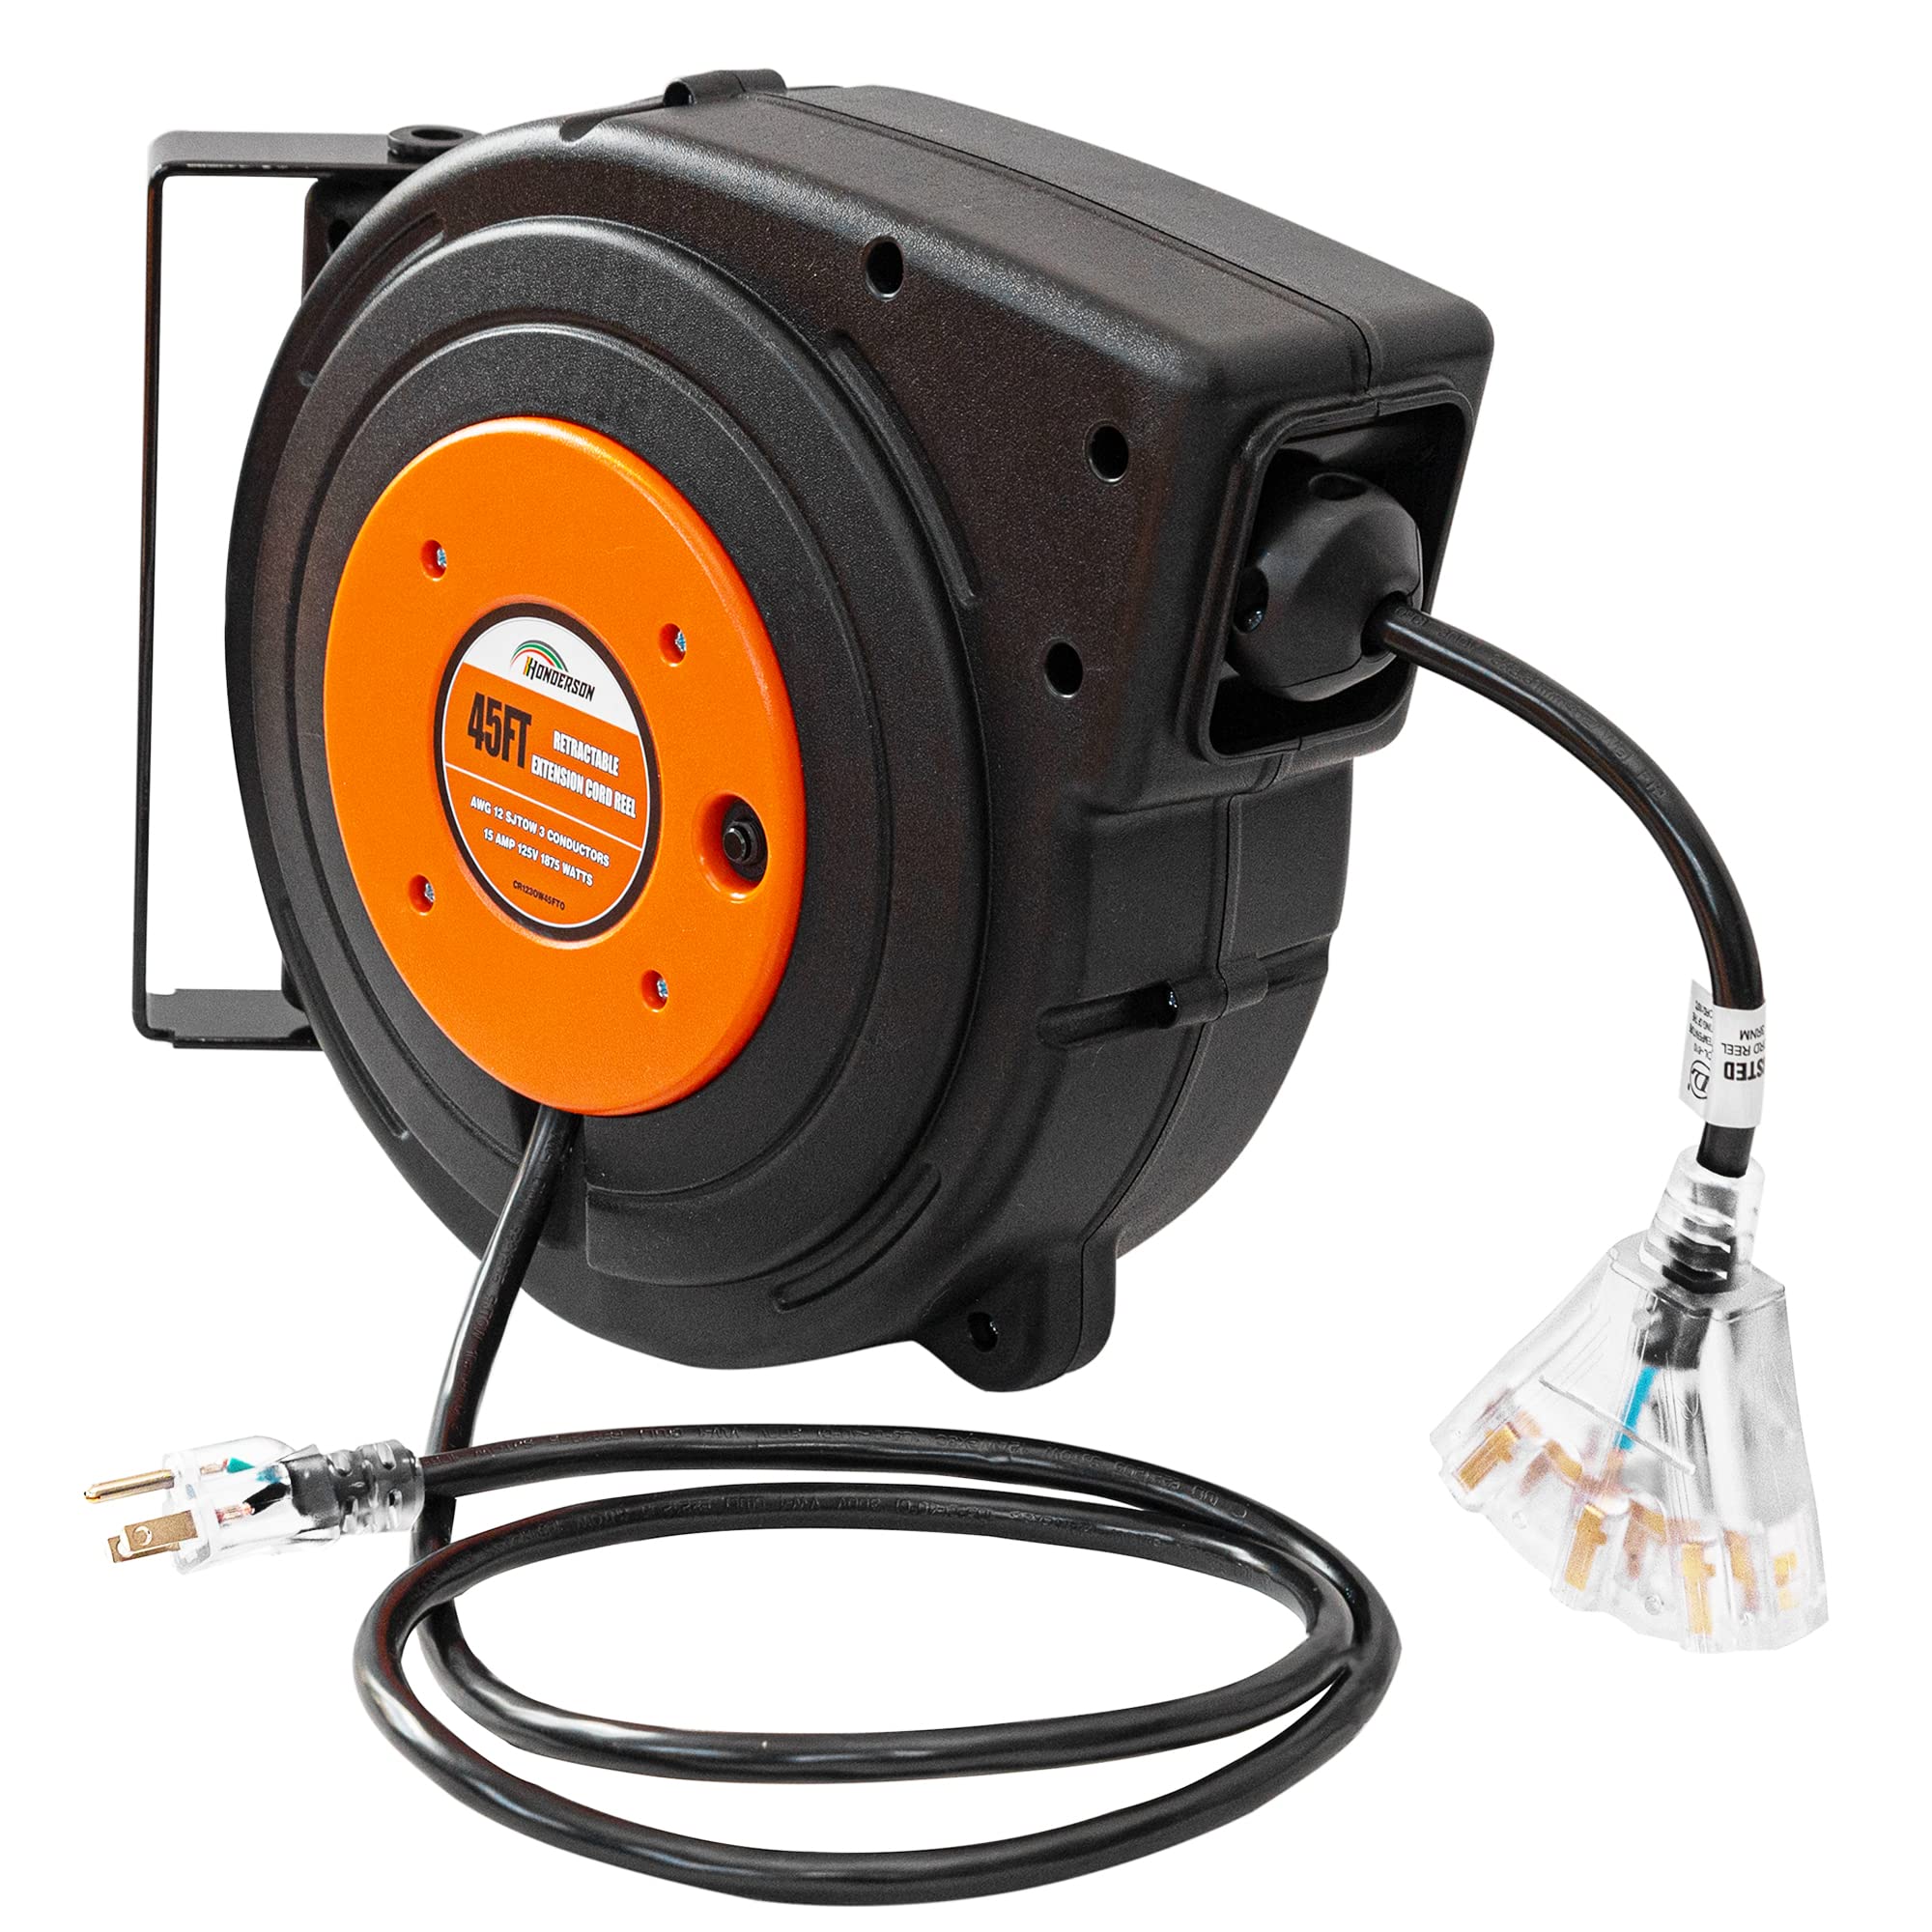 HONDERSON 45 FT Retractable Extension Cord Reel with 3 Electrical